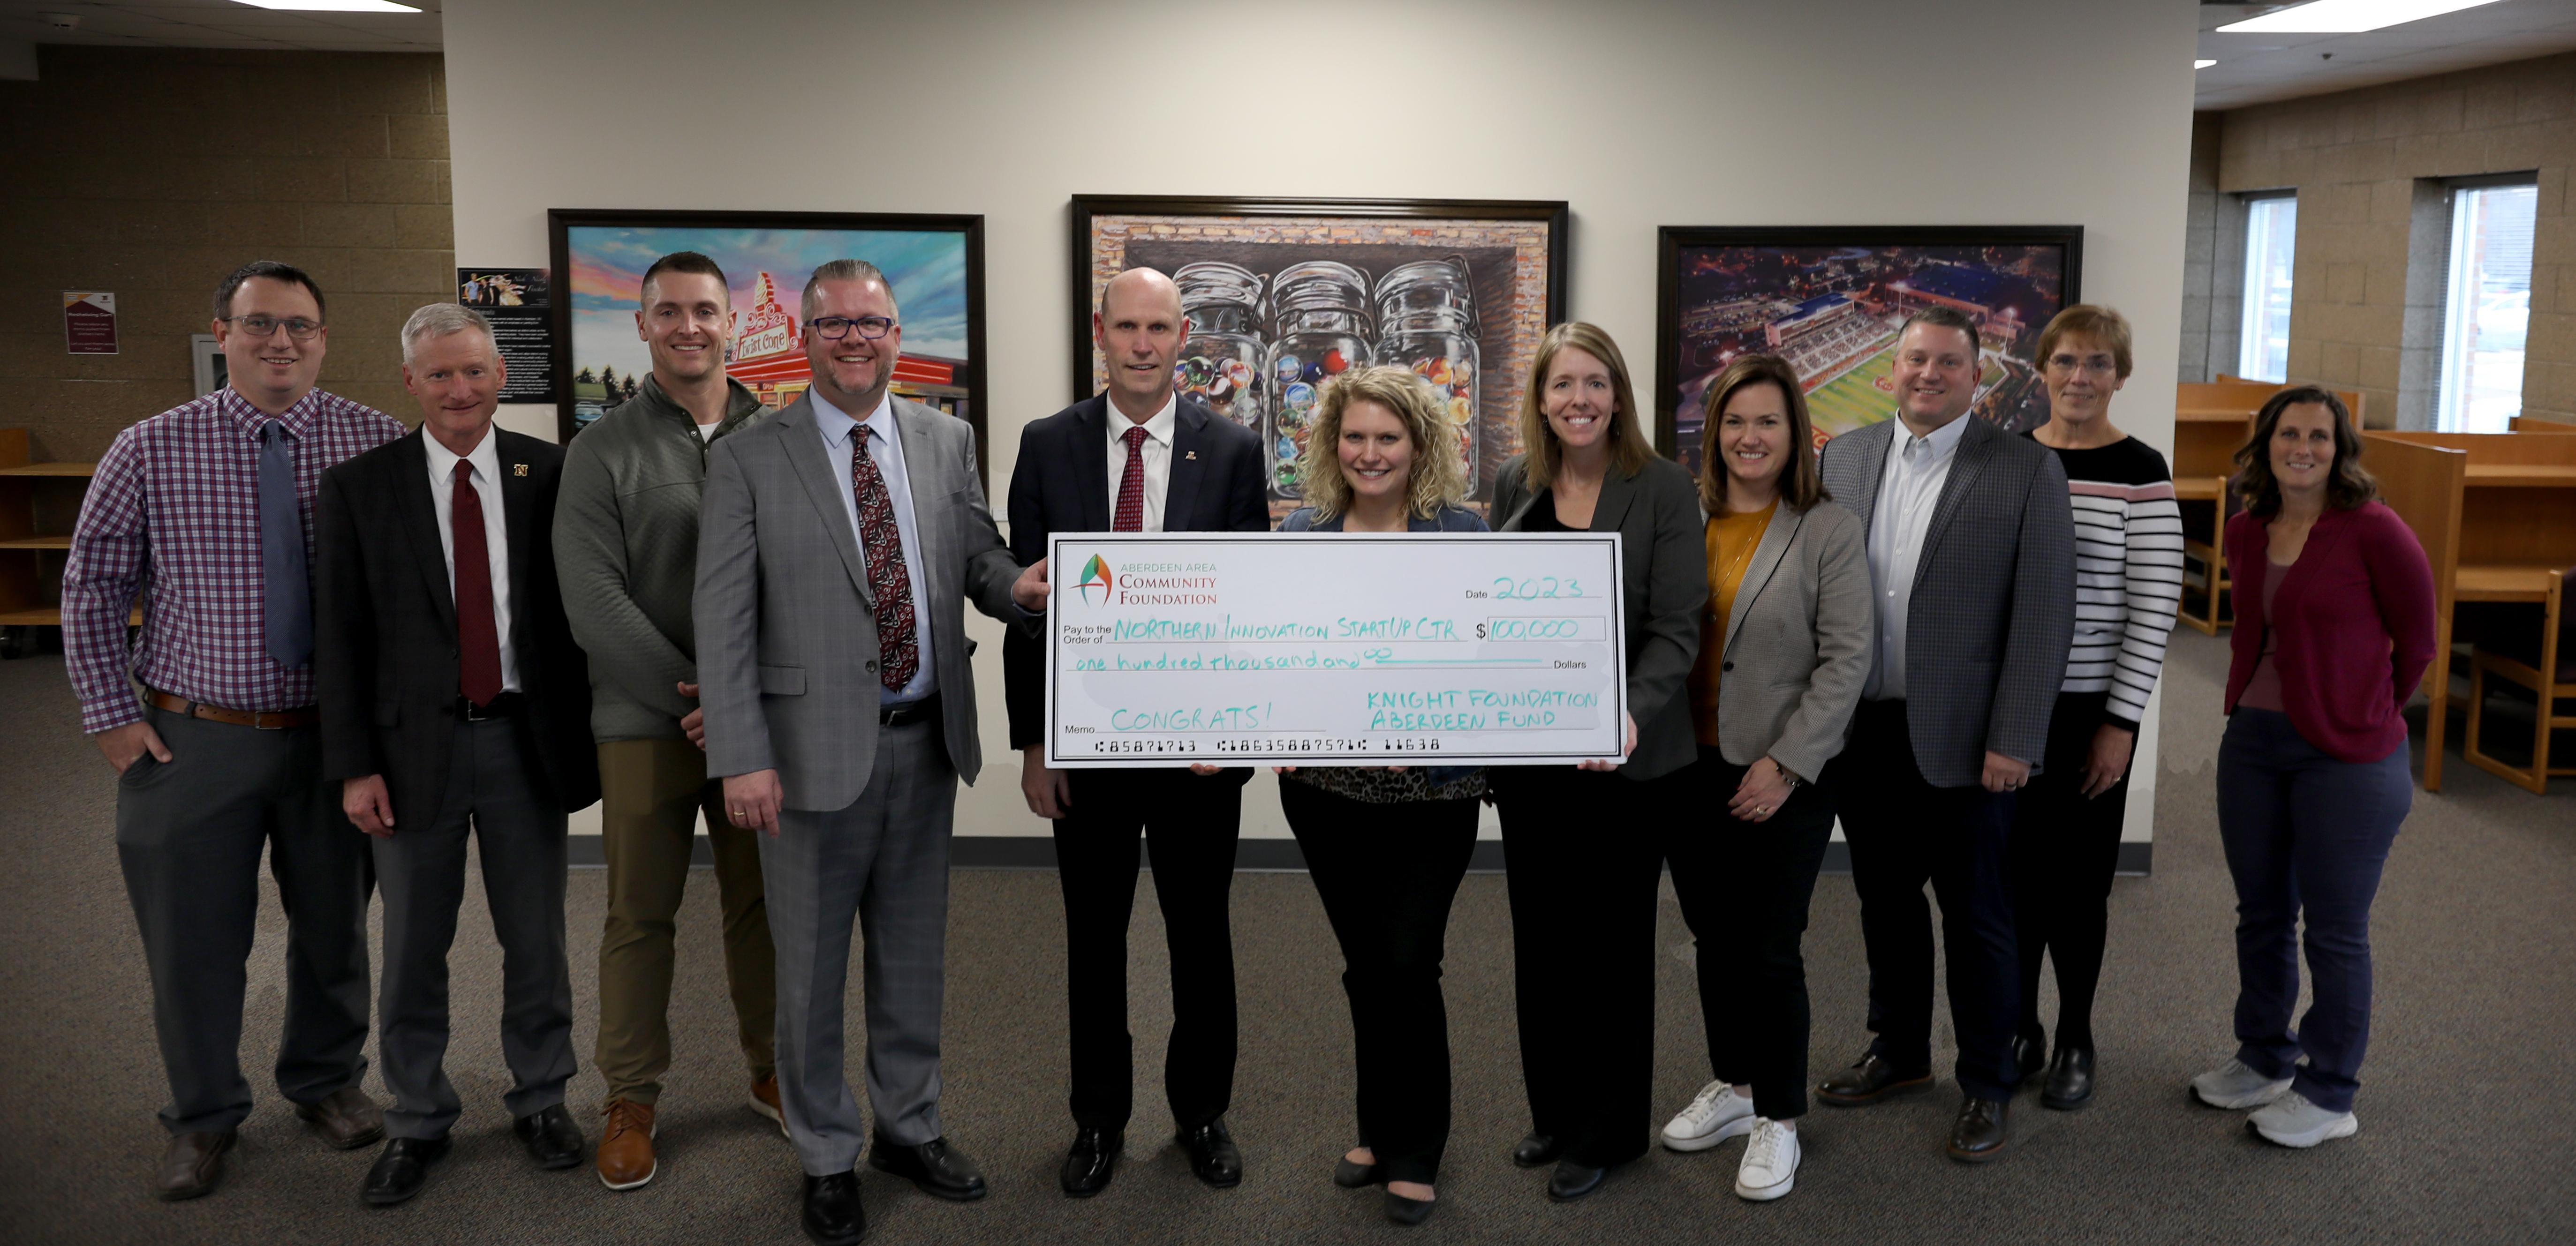 From left, Brock Hoyle, Dr. Mike Wanous, Blake Day, Michael Bockorny, Dr. Neal Schnoor, Bea Smith, Dr. Hannah Walters, Dr. Erin Fouberg, Heath Johnson, Veronica Paulson, and Dr. Alyssa Kiesow hold a check from the Knight Foundation